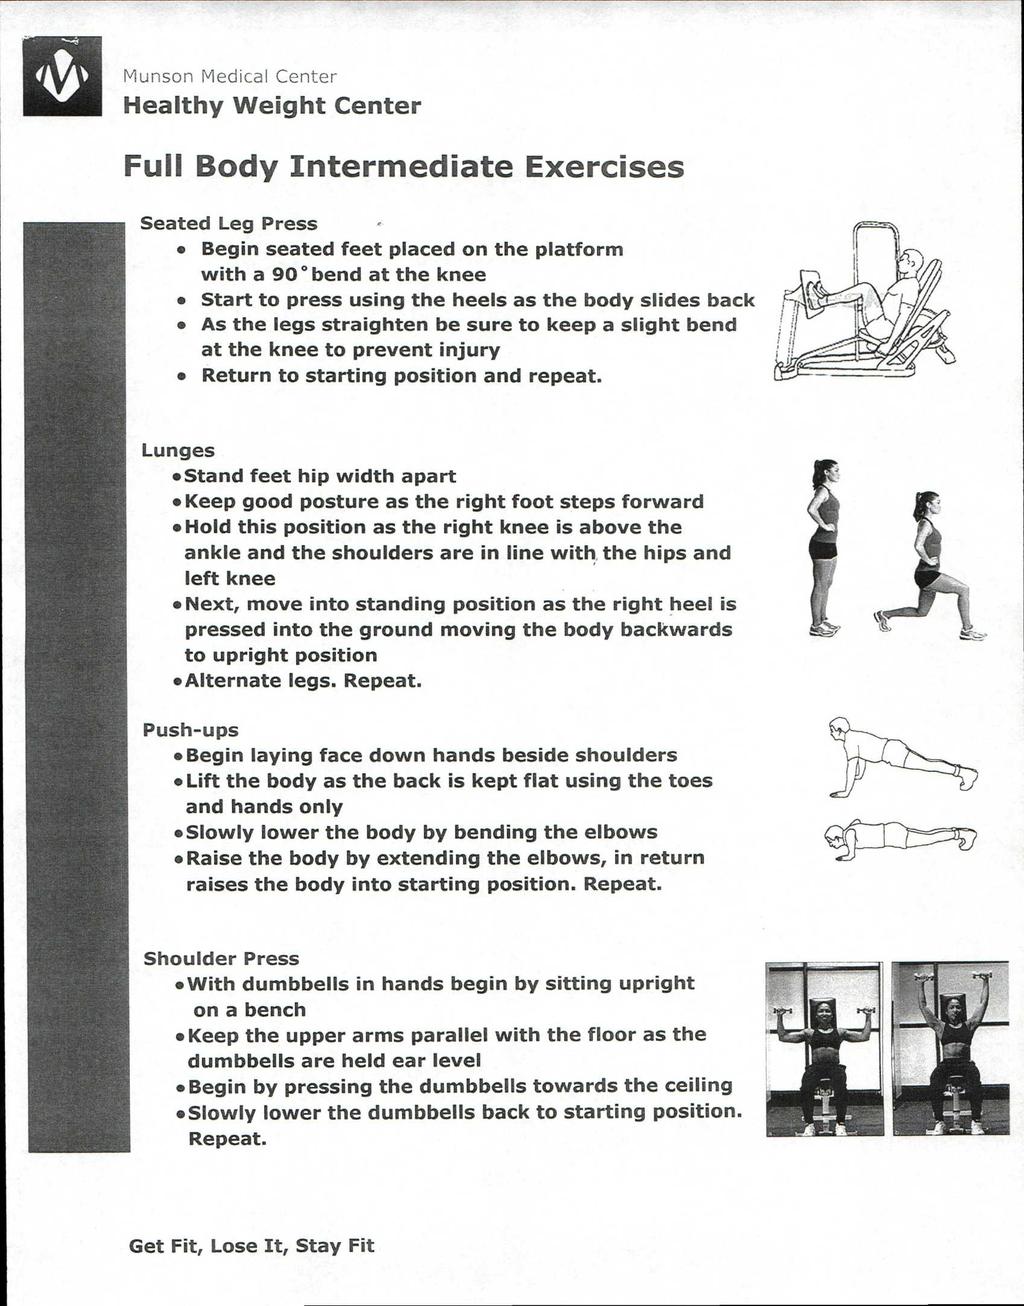 Full Body Intermediate Exercises Seated Leg Press Begin seated feet placed on the platform with a 90 bend at the knee Start to press using the heels as the body slides back As the legs straighten be